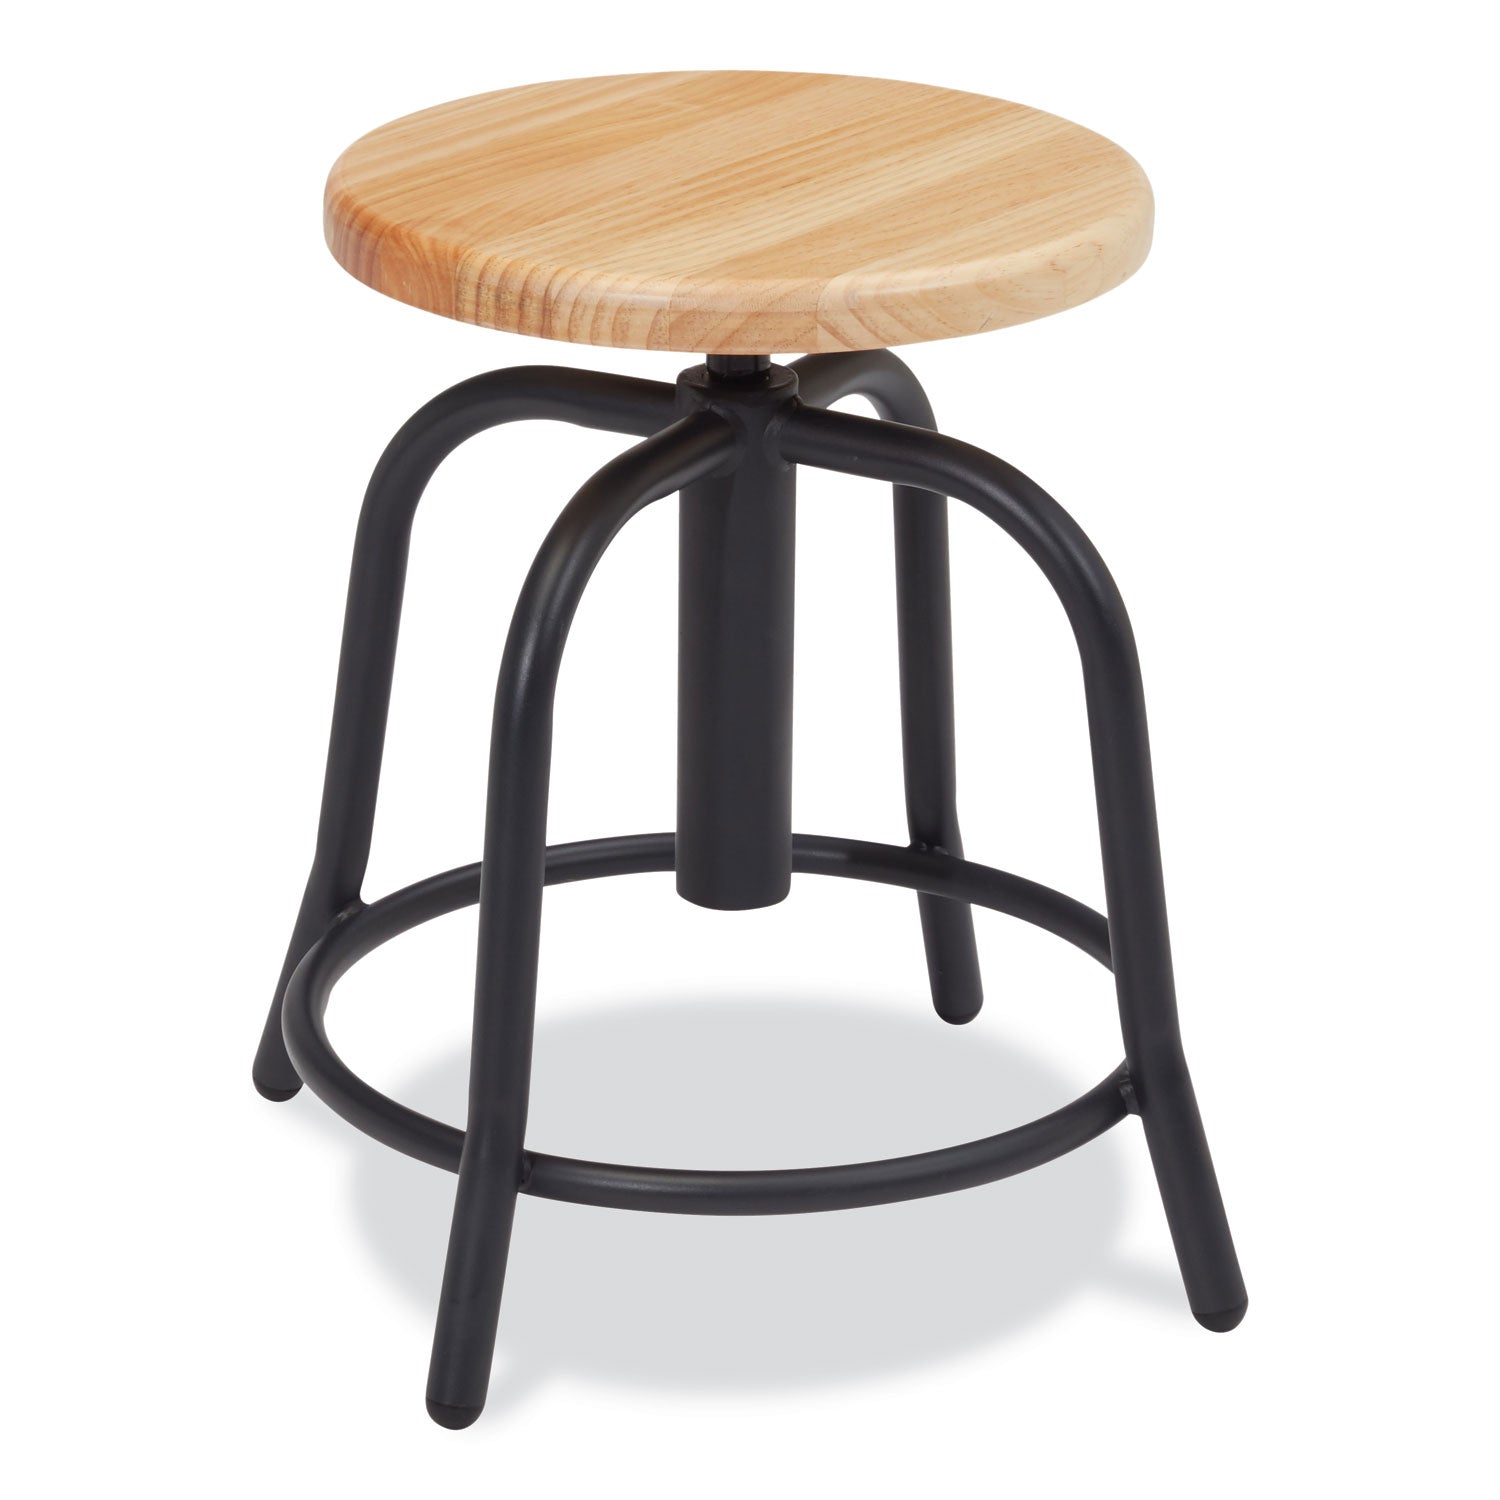 6800-series-height-adj-wood-seat-swivel-stool-supports-300-lb-19-25-seat-ht-maple-seat-black-base-ships-in-1-3-bus-days_nps6800w10 - 1